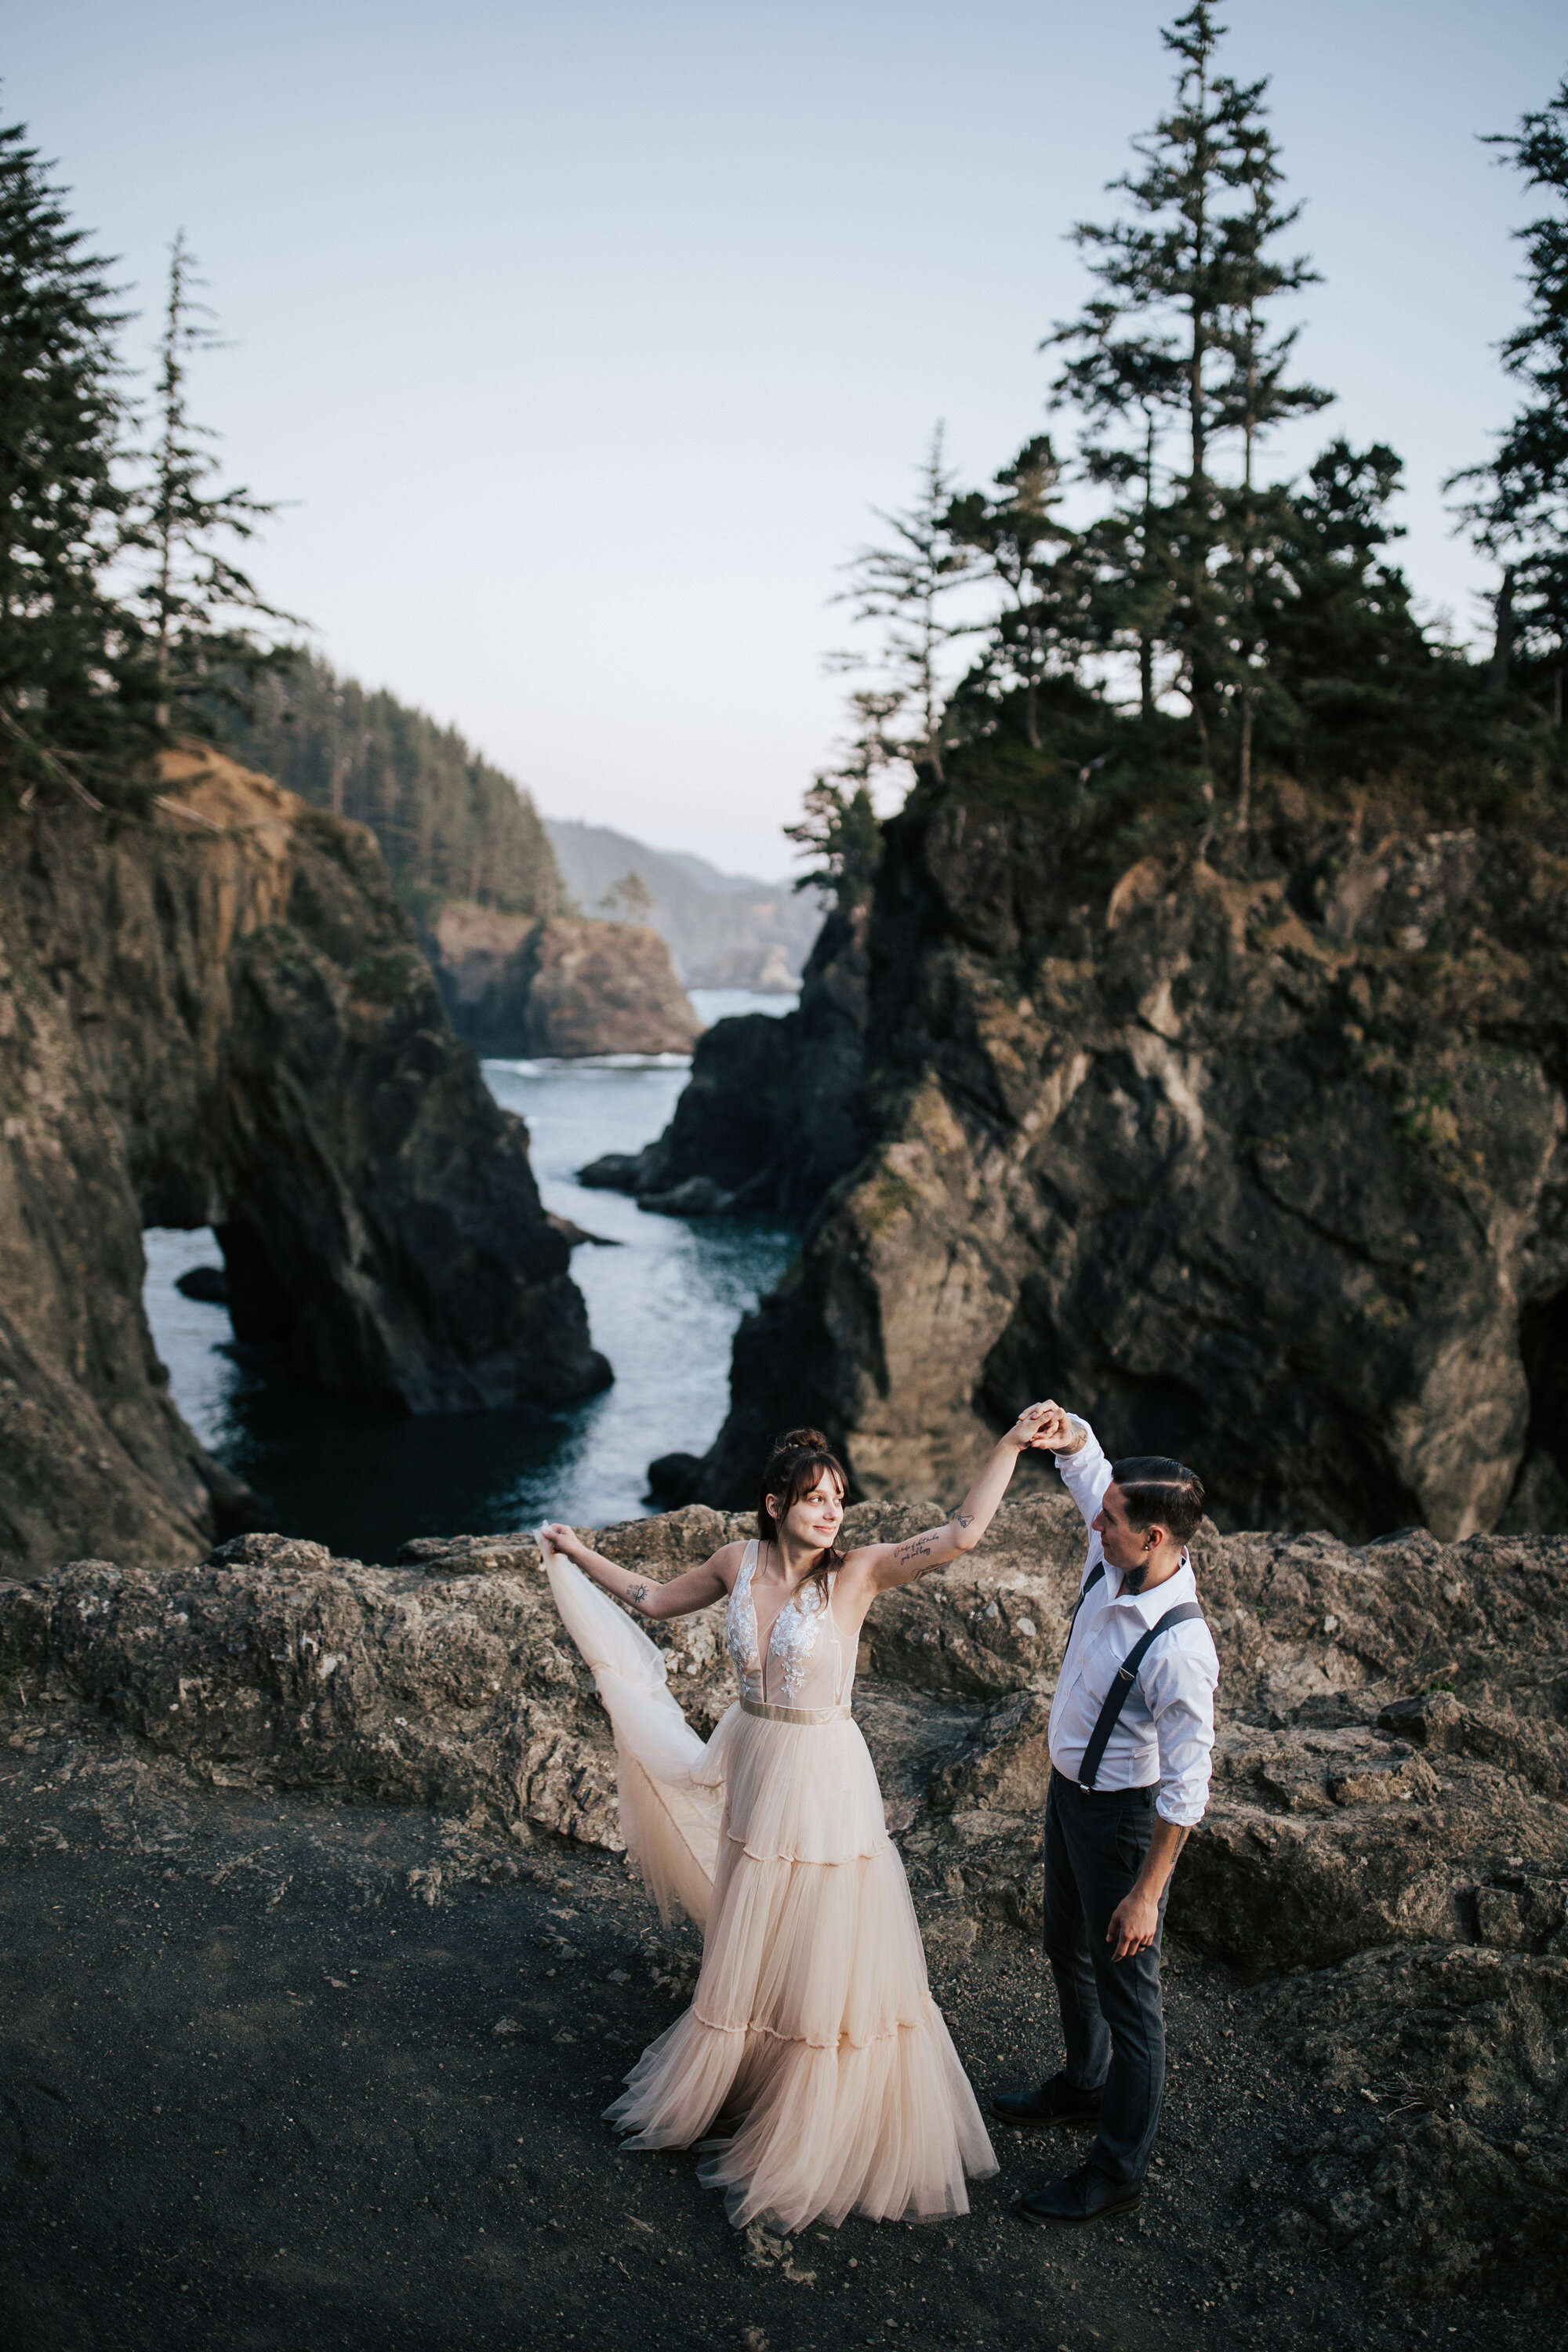  Oregon Coast elopement photographer Emily Jenkins Photography captures a groom spining his bride around in a twirl during their intimate beach wedding portraits. beach wedding portraits travel photographer destination photographer Oregon #emilyjenki